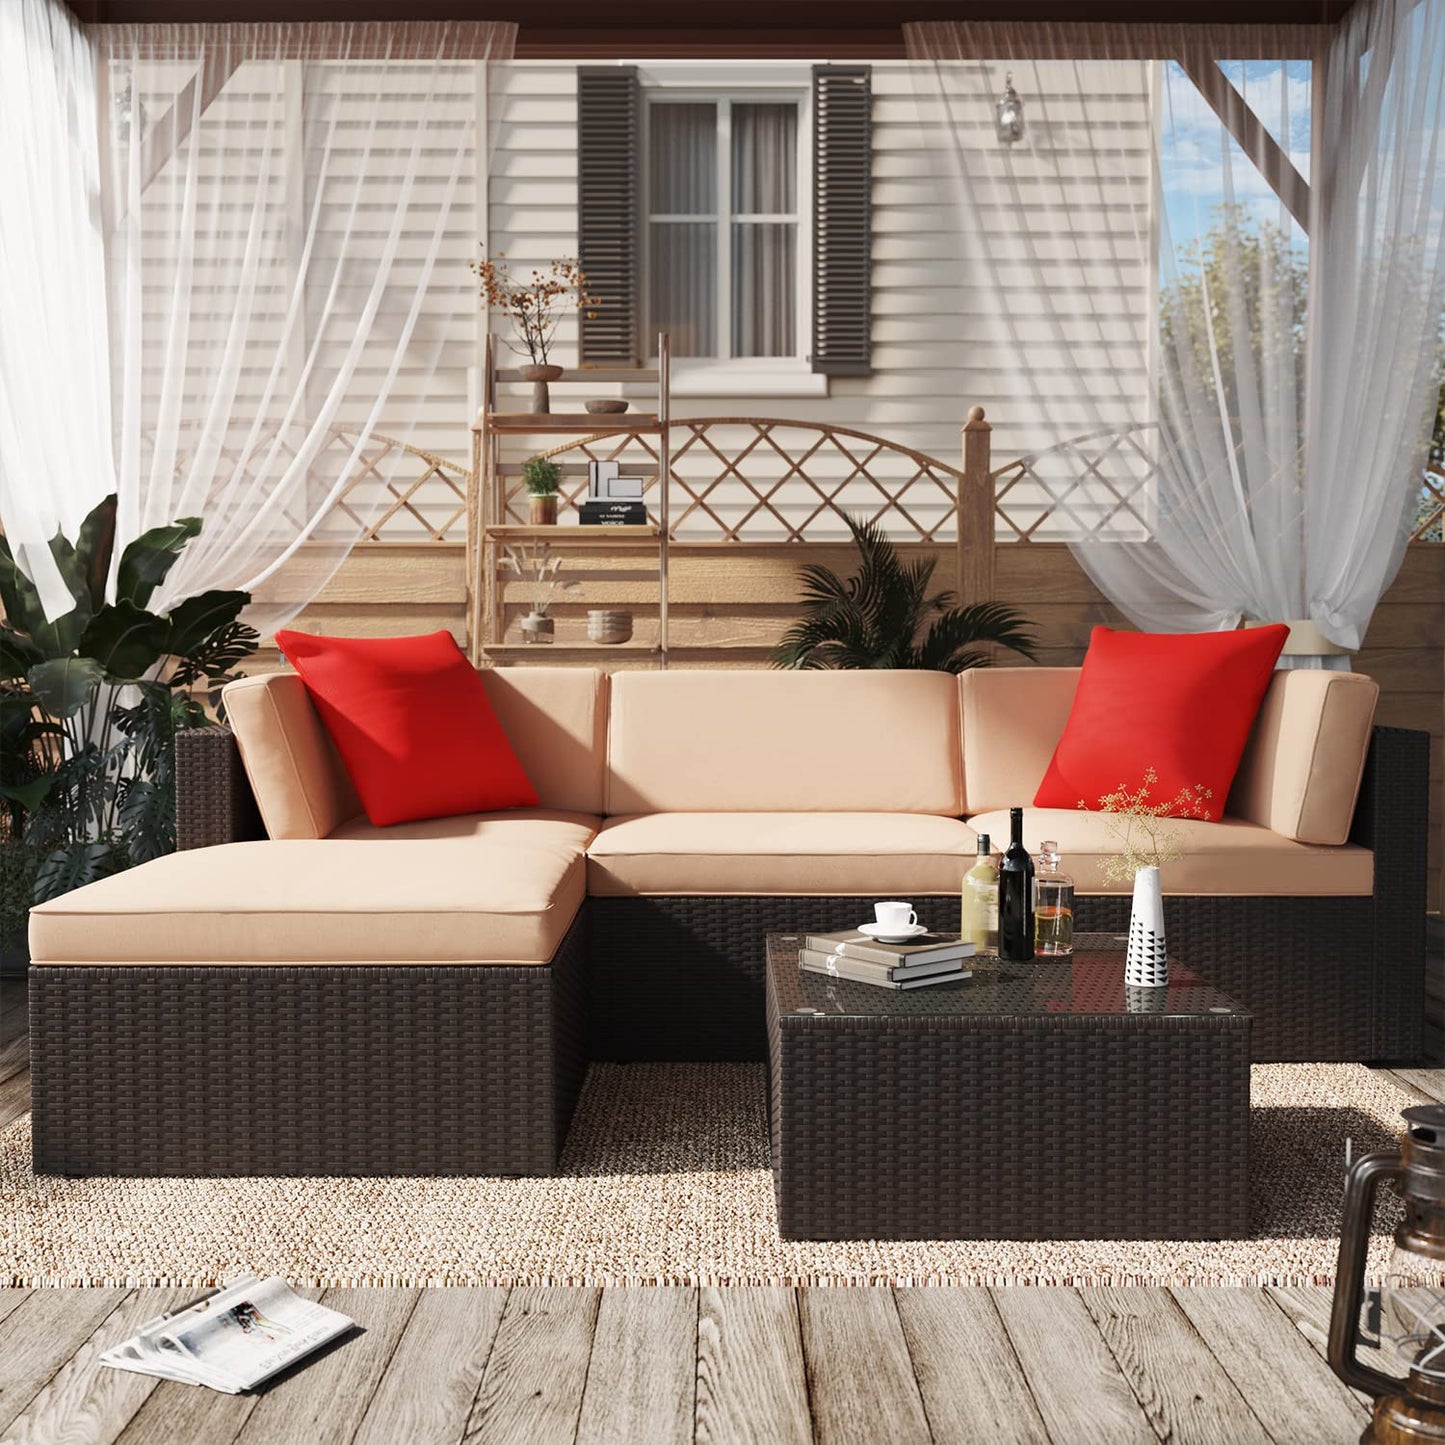 Greesum Patio Furniture Sets 5 Piece Outdoor Wicker Rattan Sectional Sofa with Cushions, Pillows & Glass Table, Beige 5 Pieces